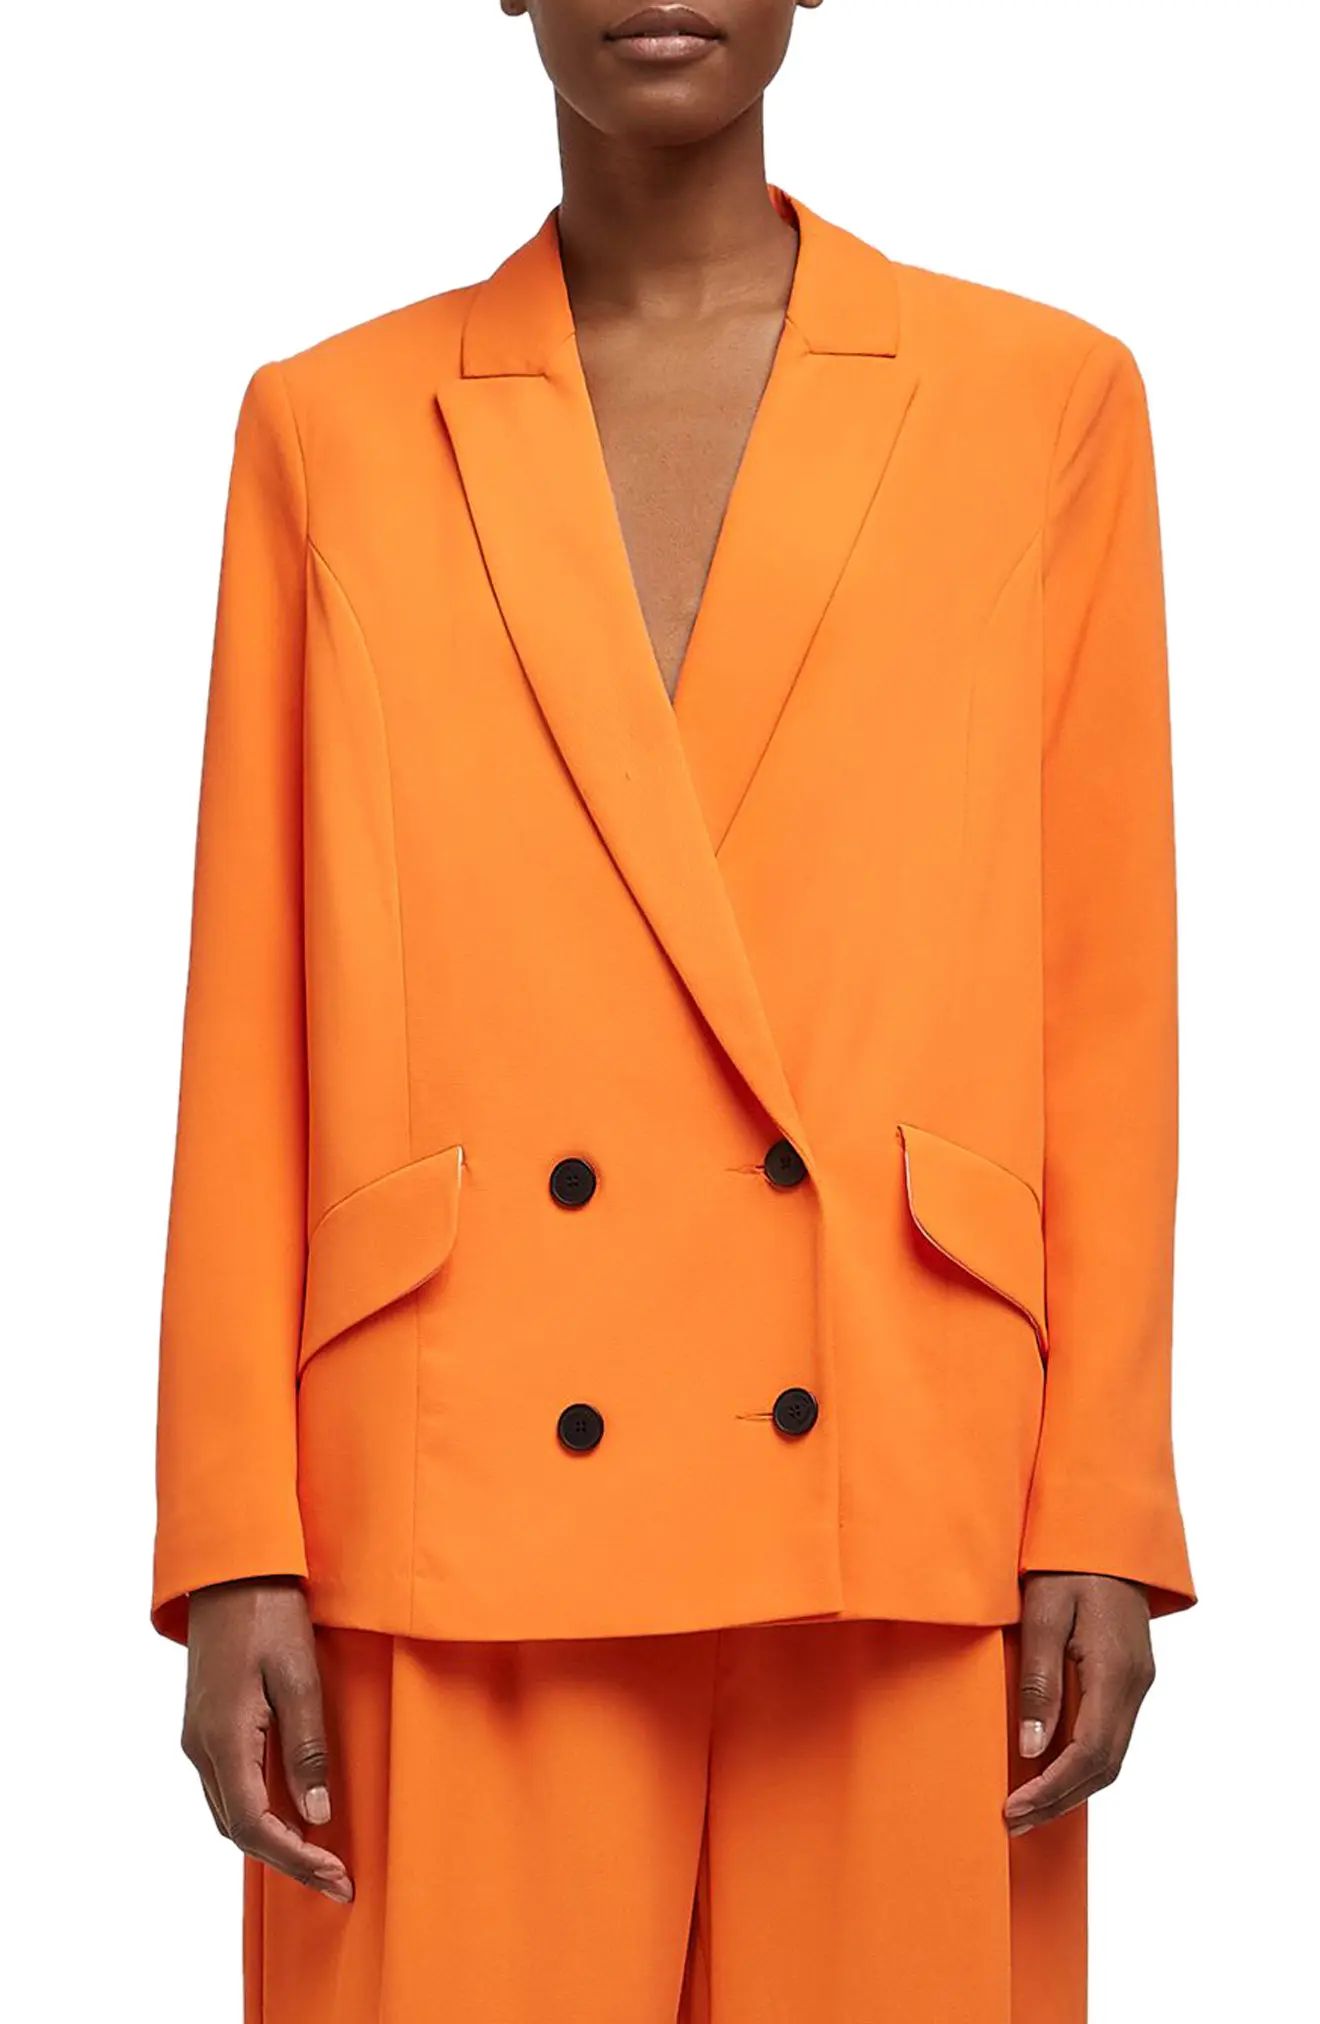 River Island Structured Double Breasted Blazer in Orange at Nordstrom, Size 14 Us | Nordstrom